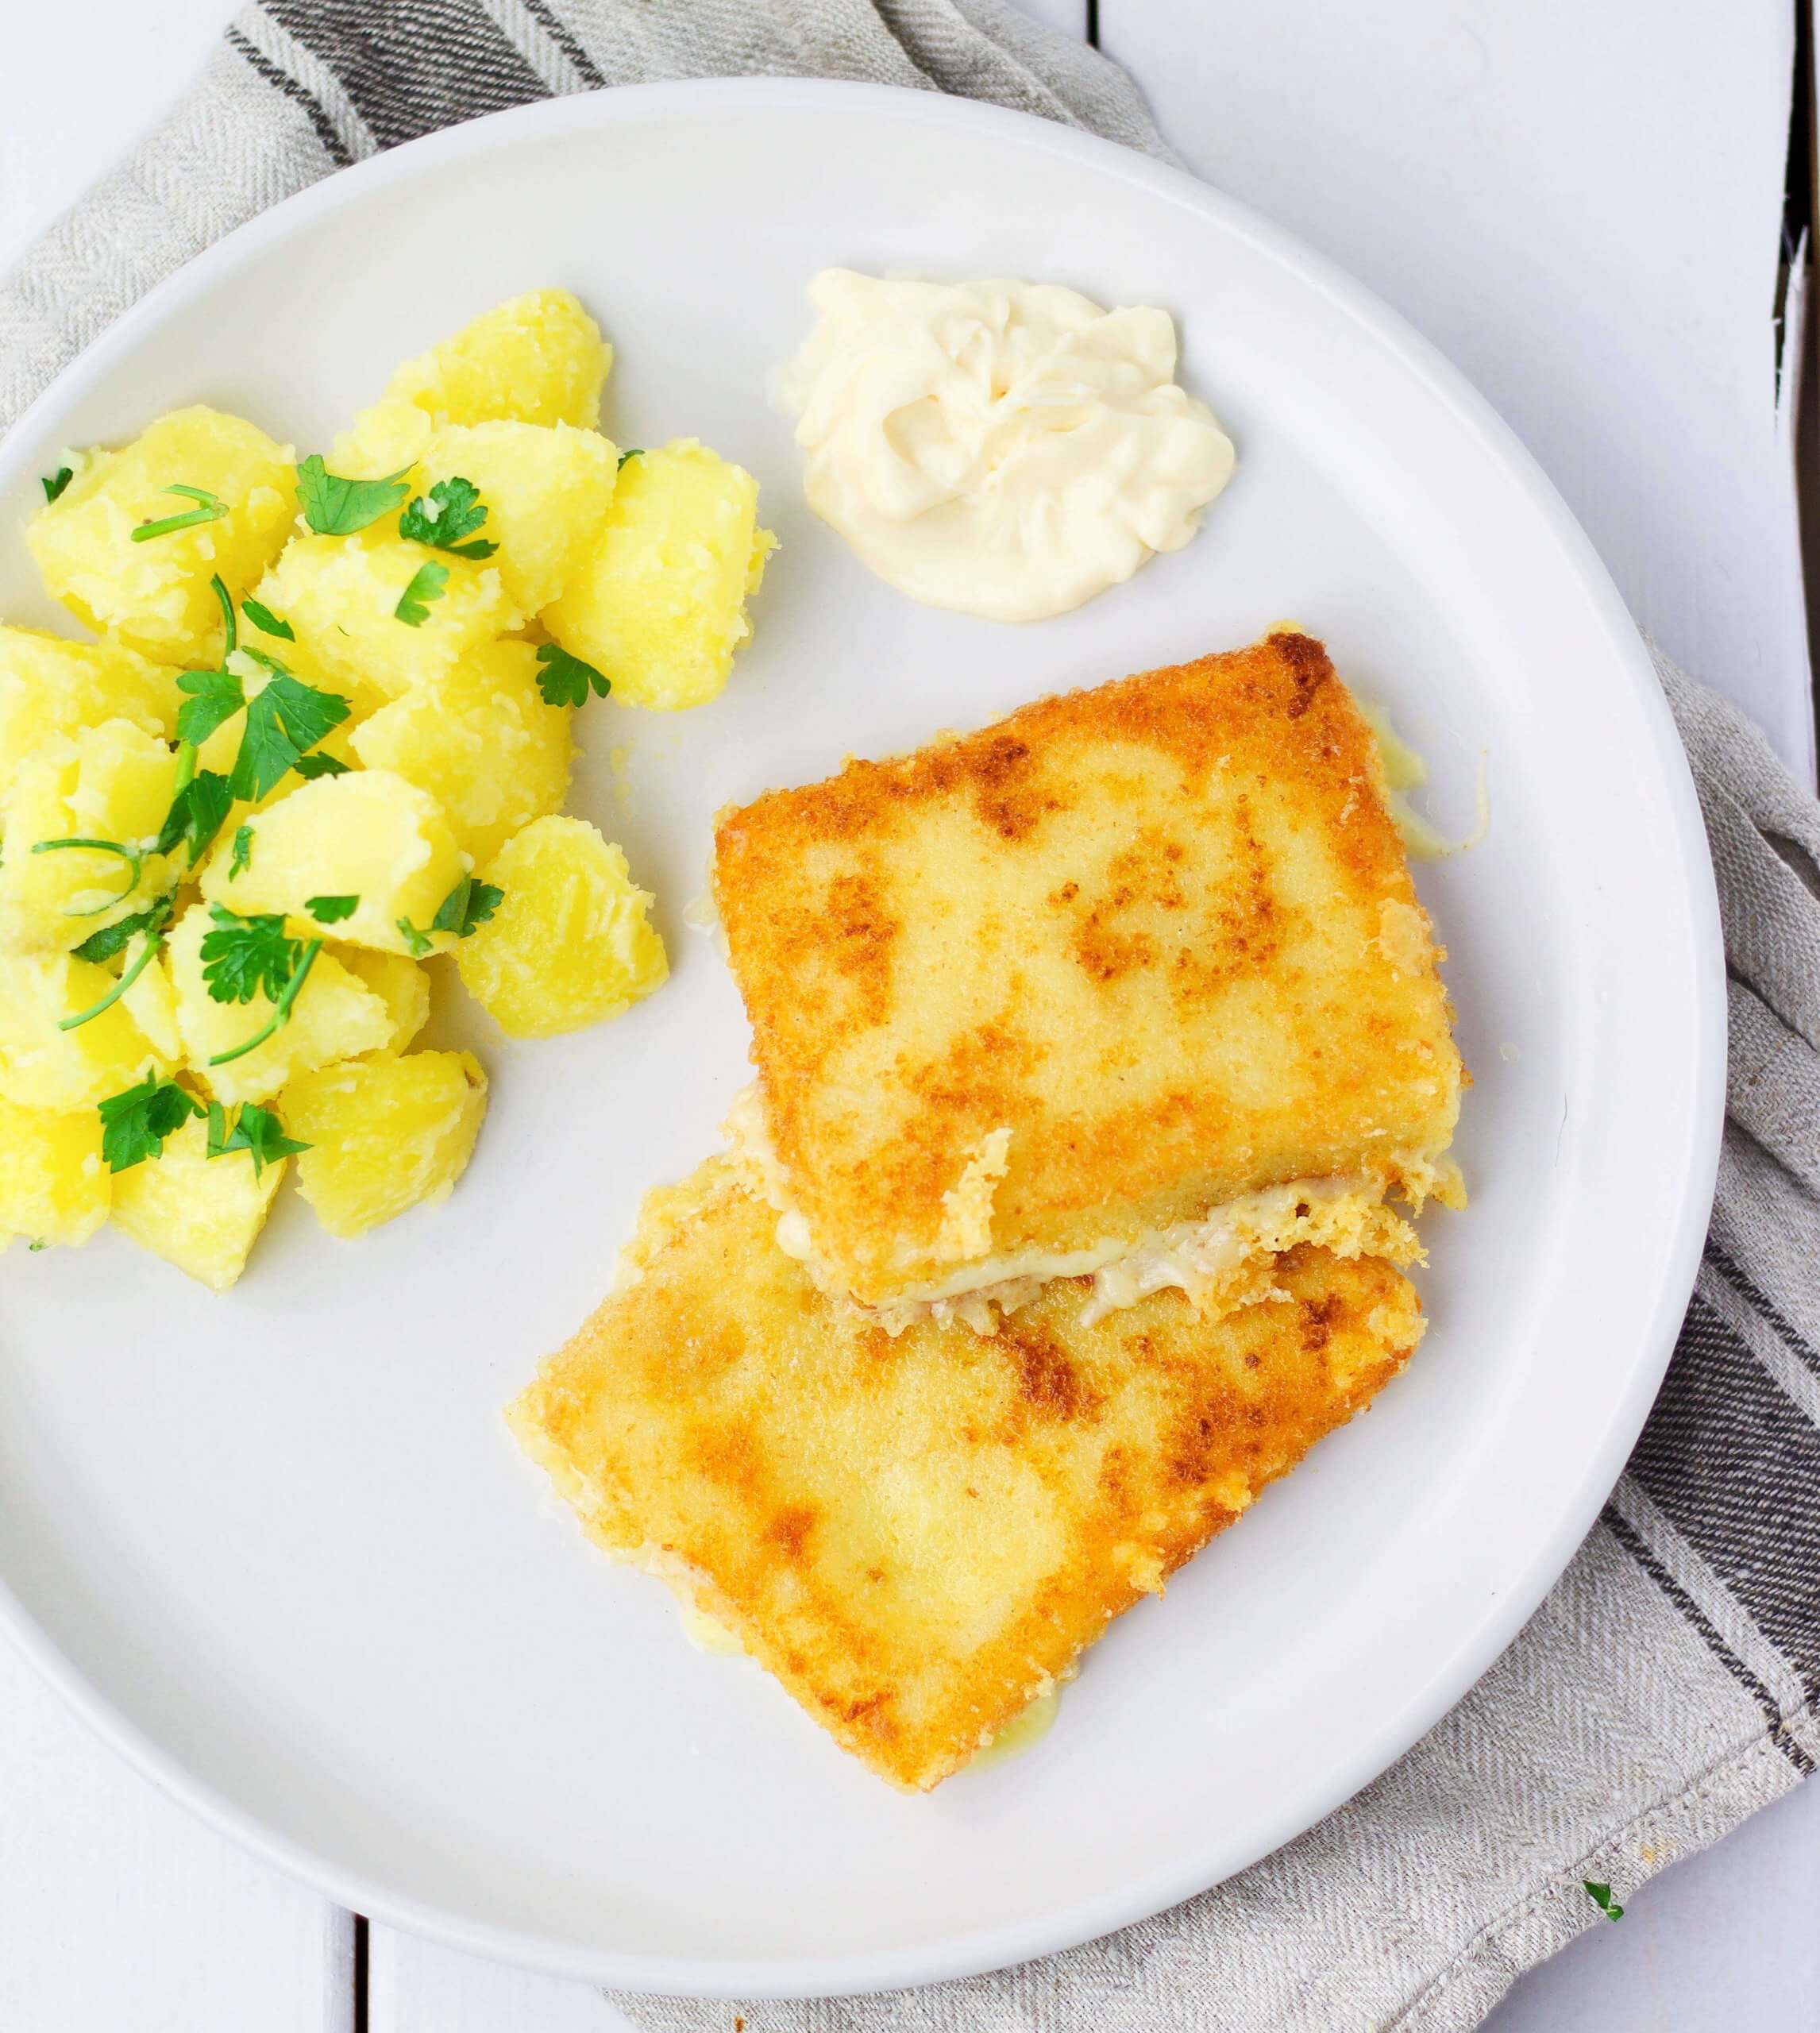 Fried Cheese (Slovak classic)